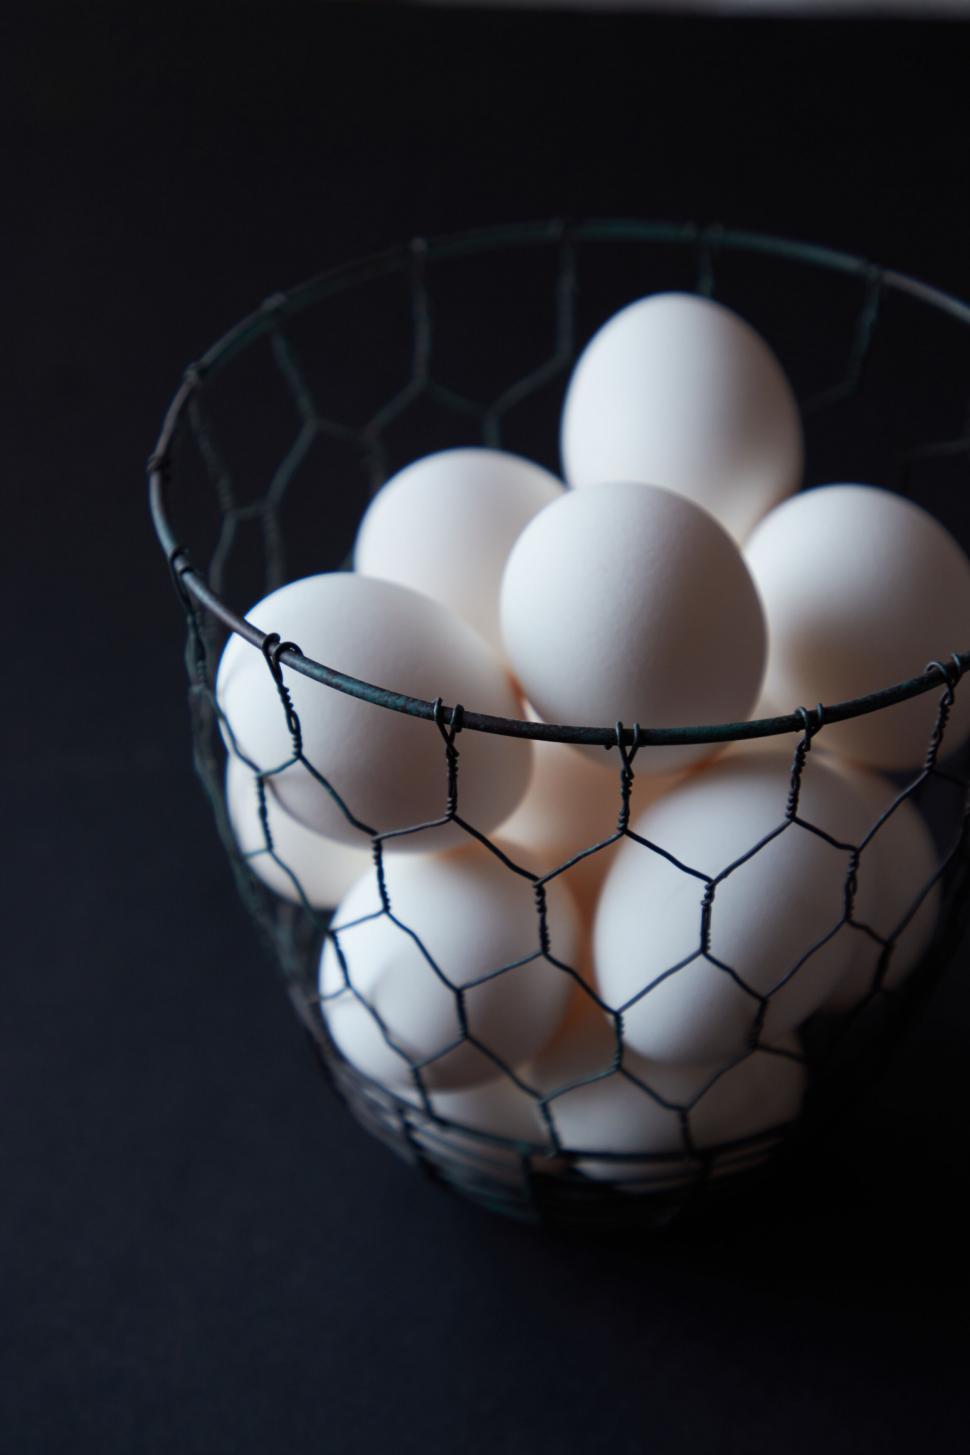 Free Image of White eggs in a wire basket 